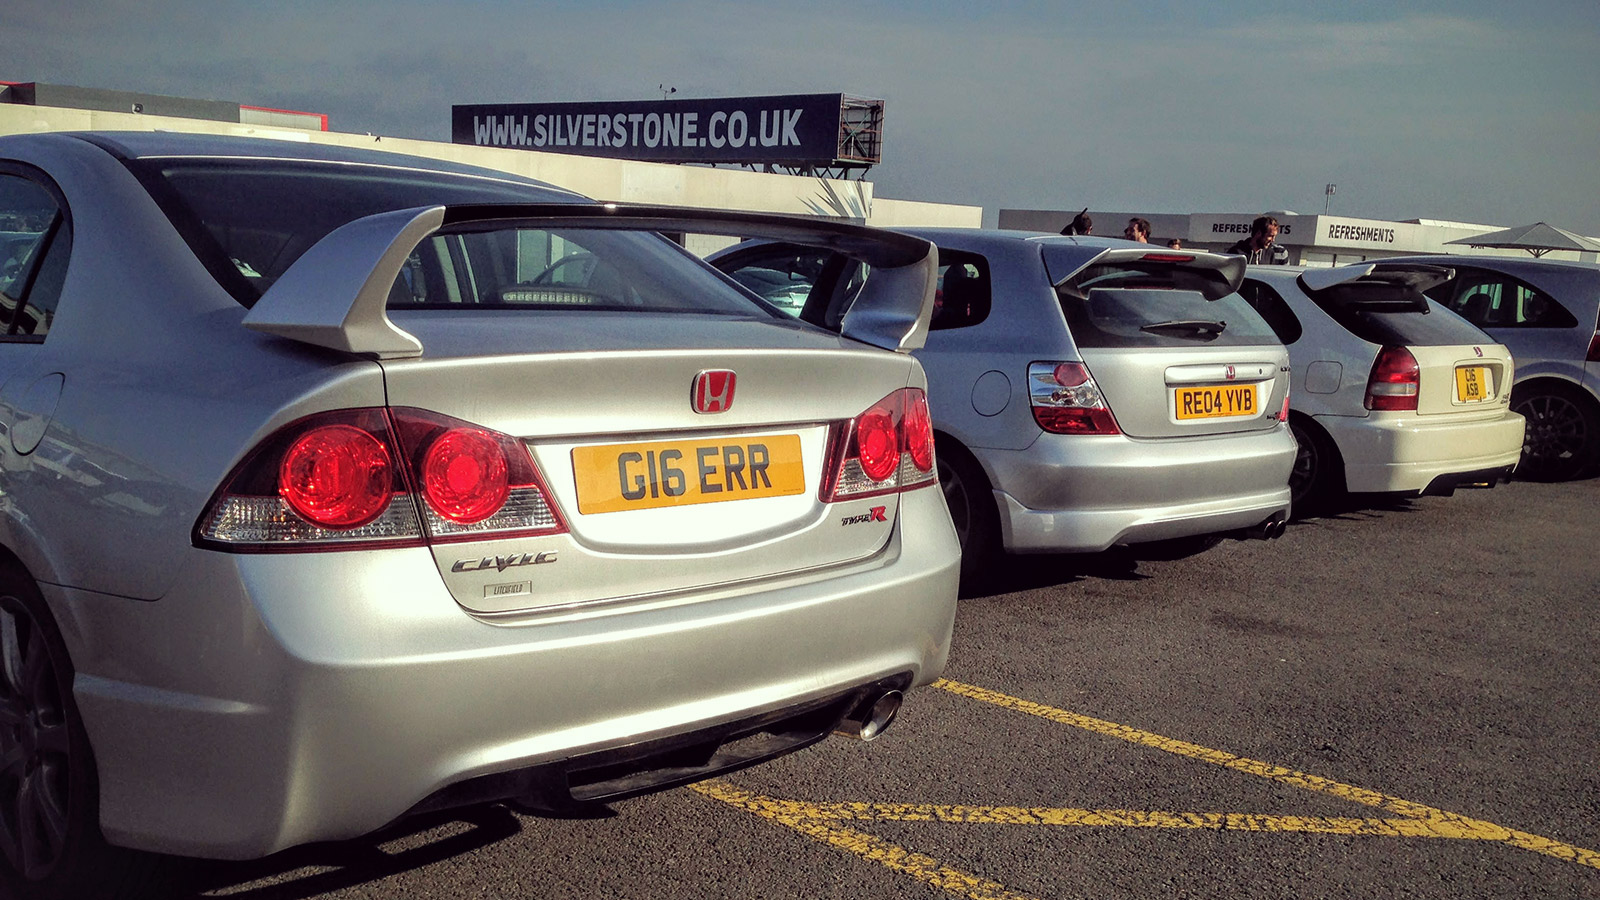 Collection of cars at Silverstone Sunday service